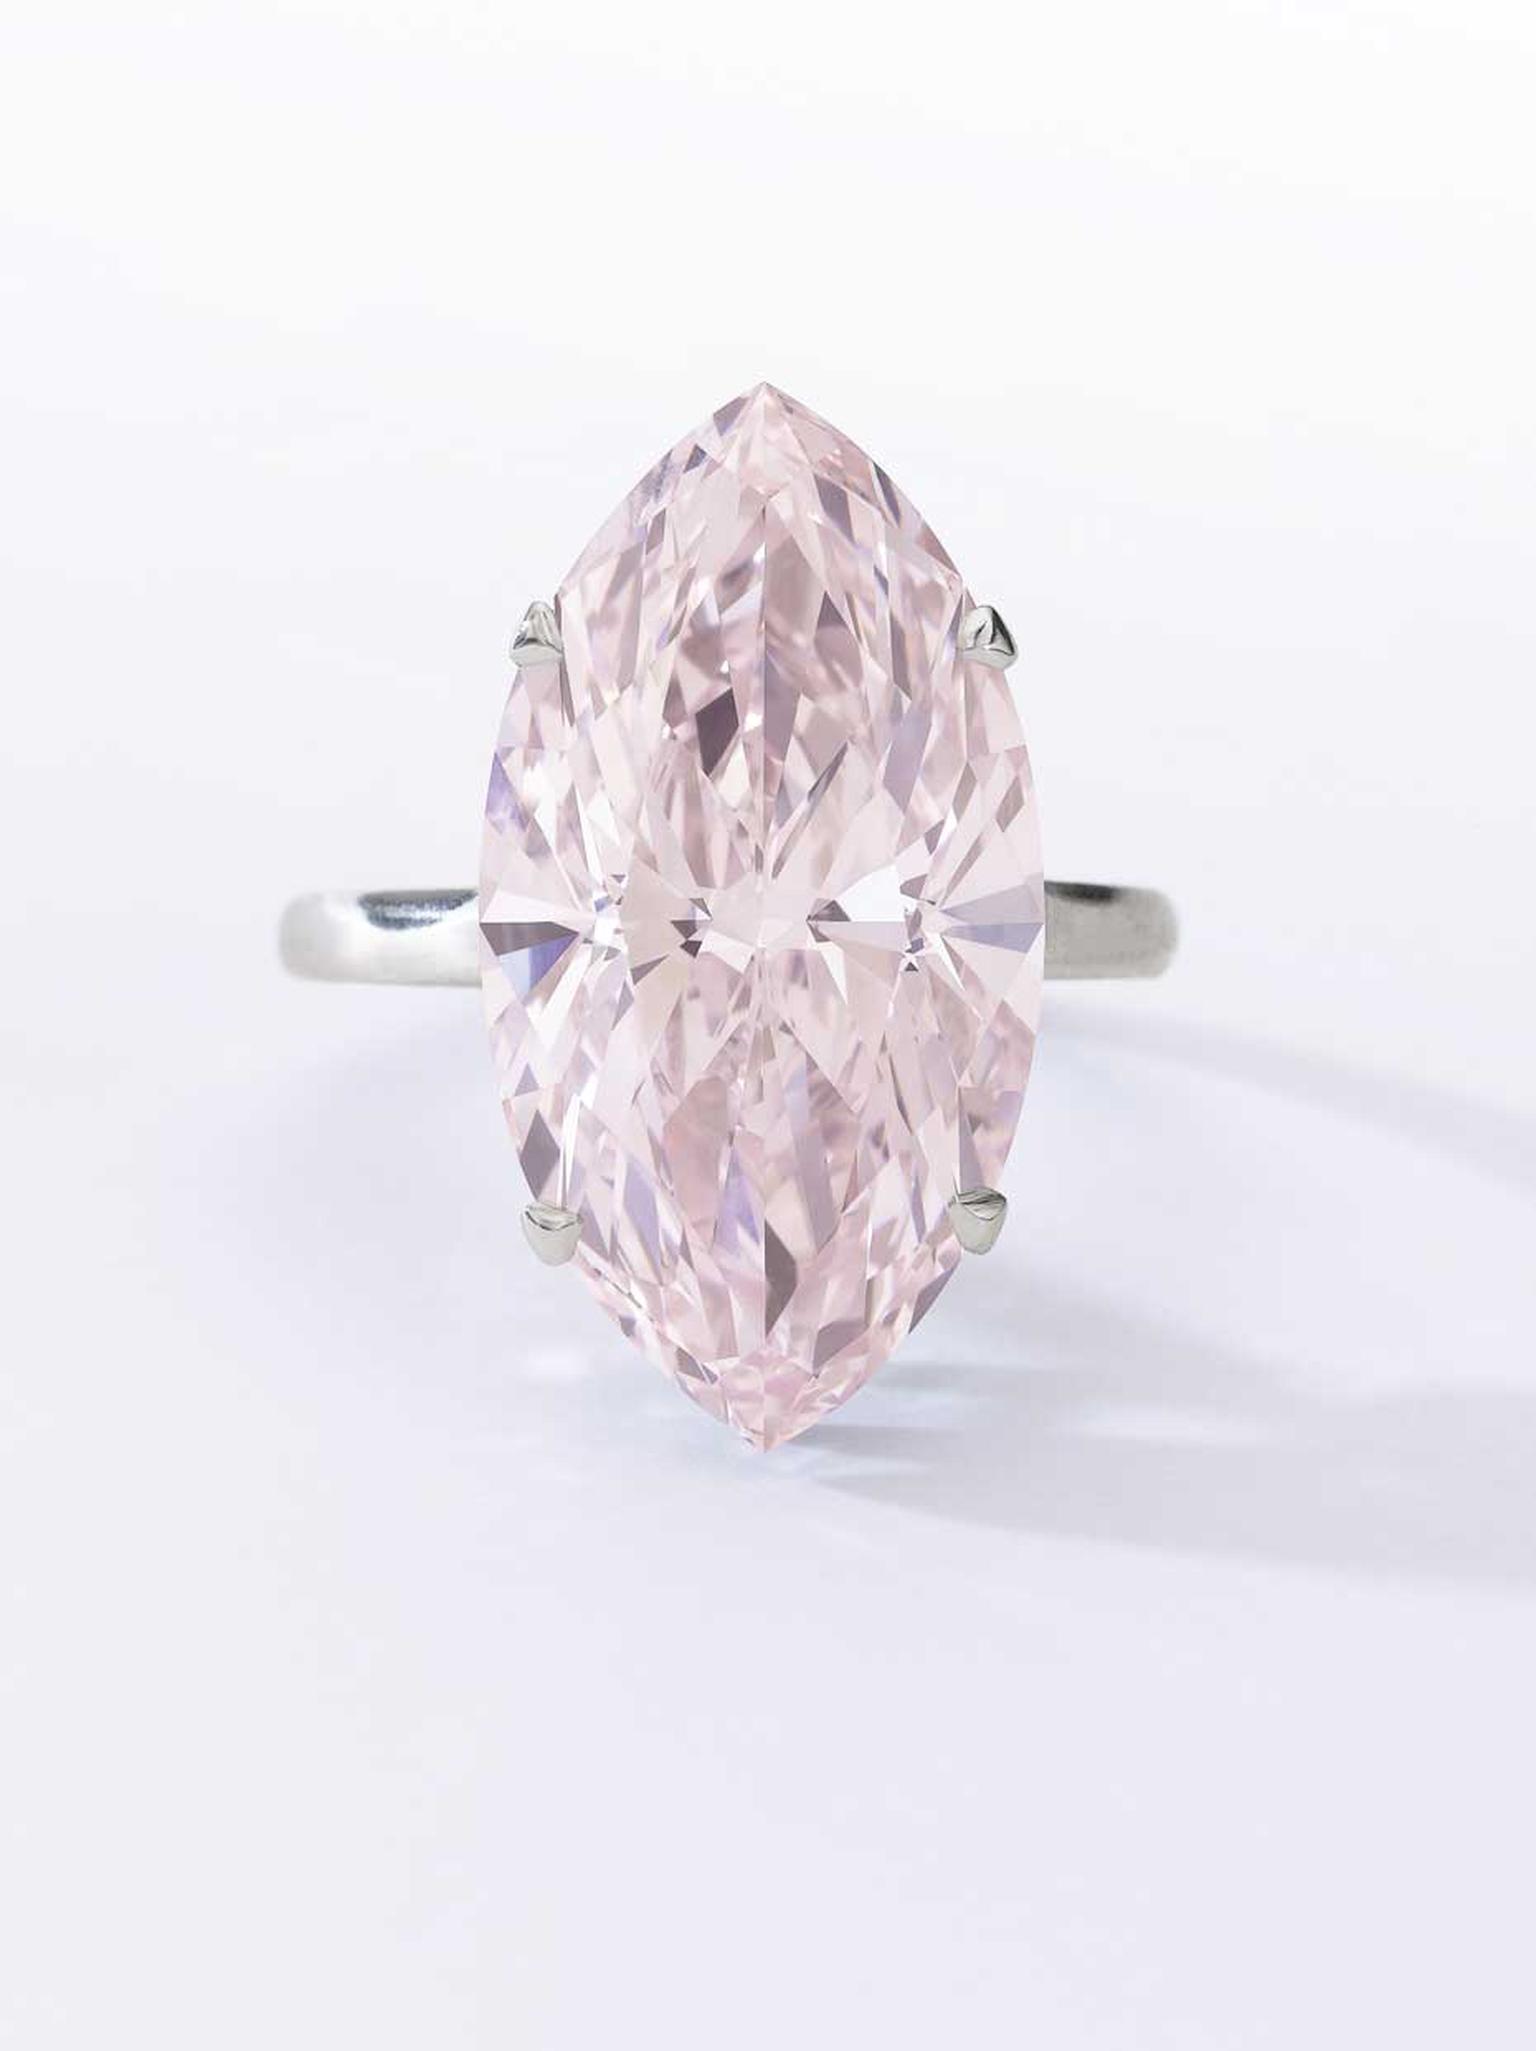 Very Fine Fancy Pink diamond ring featuring a 12.07ct marquise-cut pink diamond. Sold for CHF 6,437,000 (estimate: CHF 3,570,000-6,200,000)